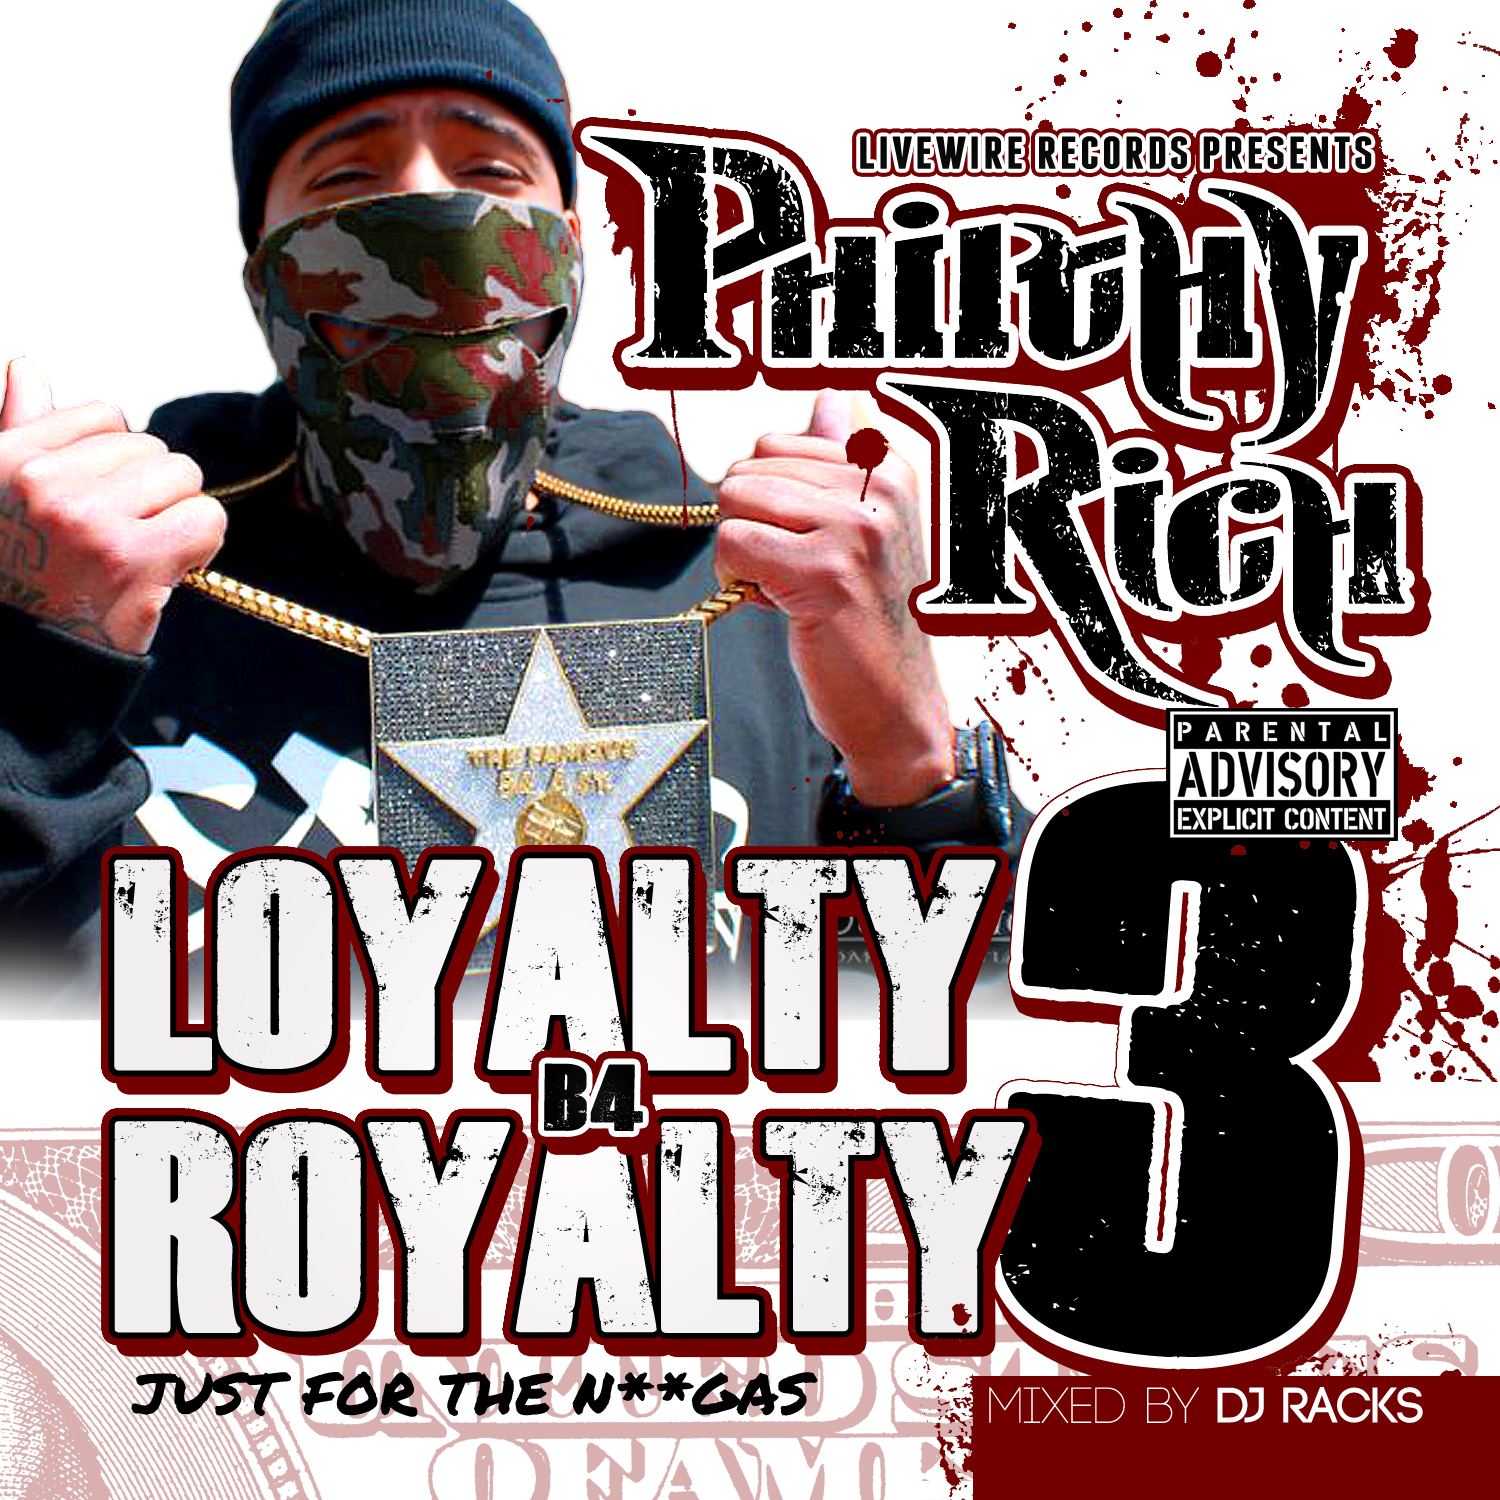 Philthy Rich - Loyalty B4 Royalty 3 (Just For The Niggas) Cover Art